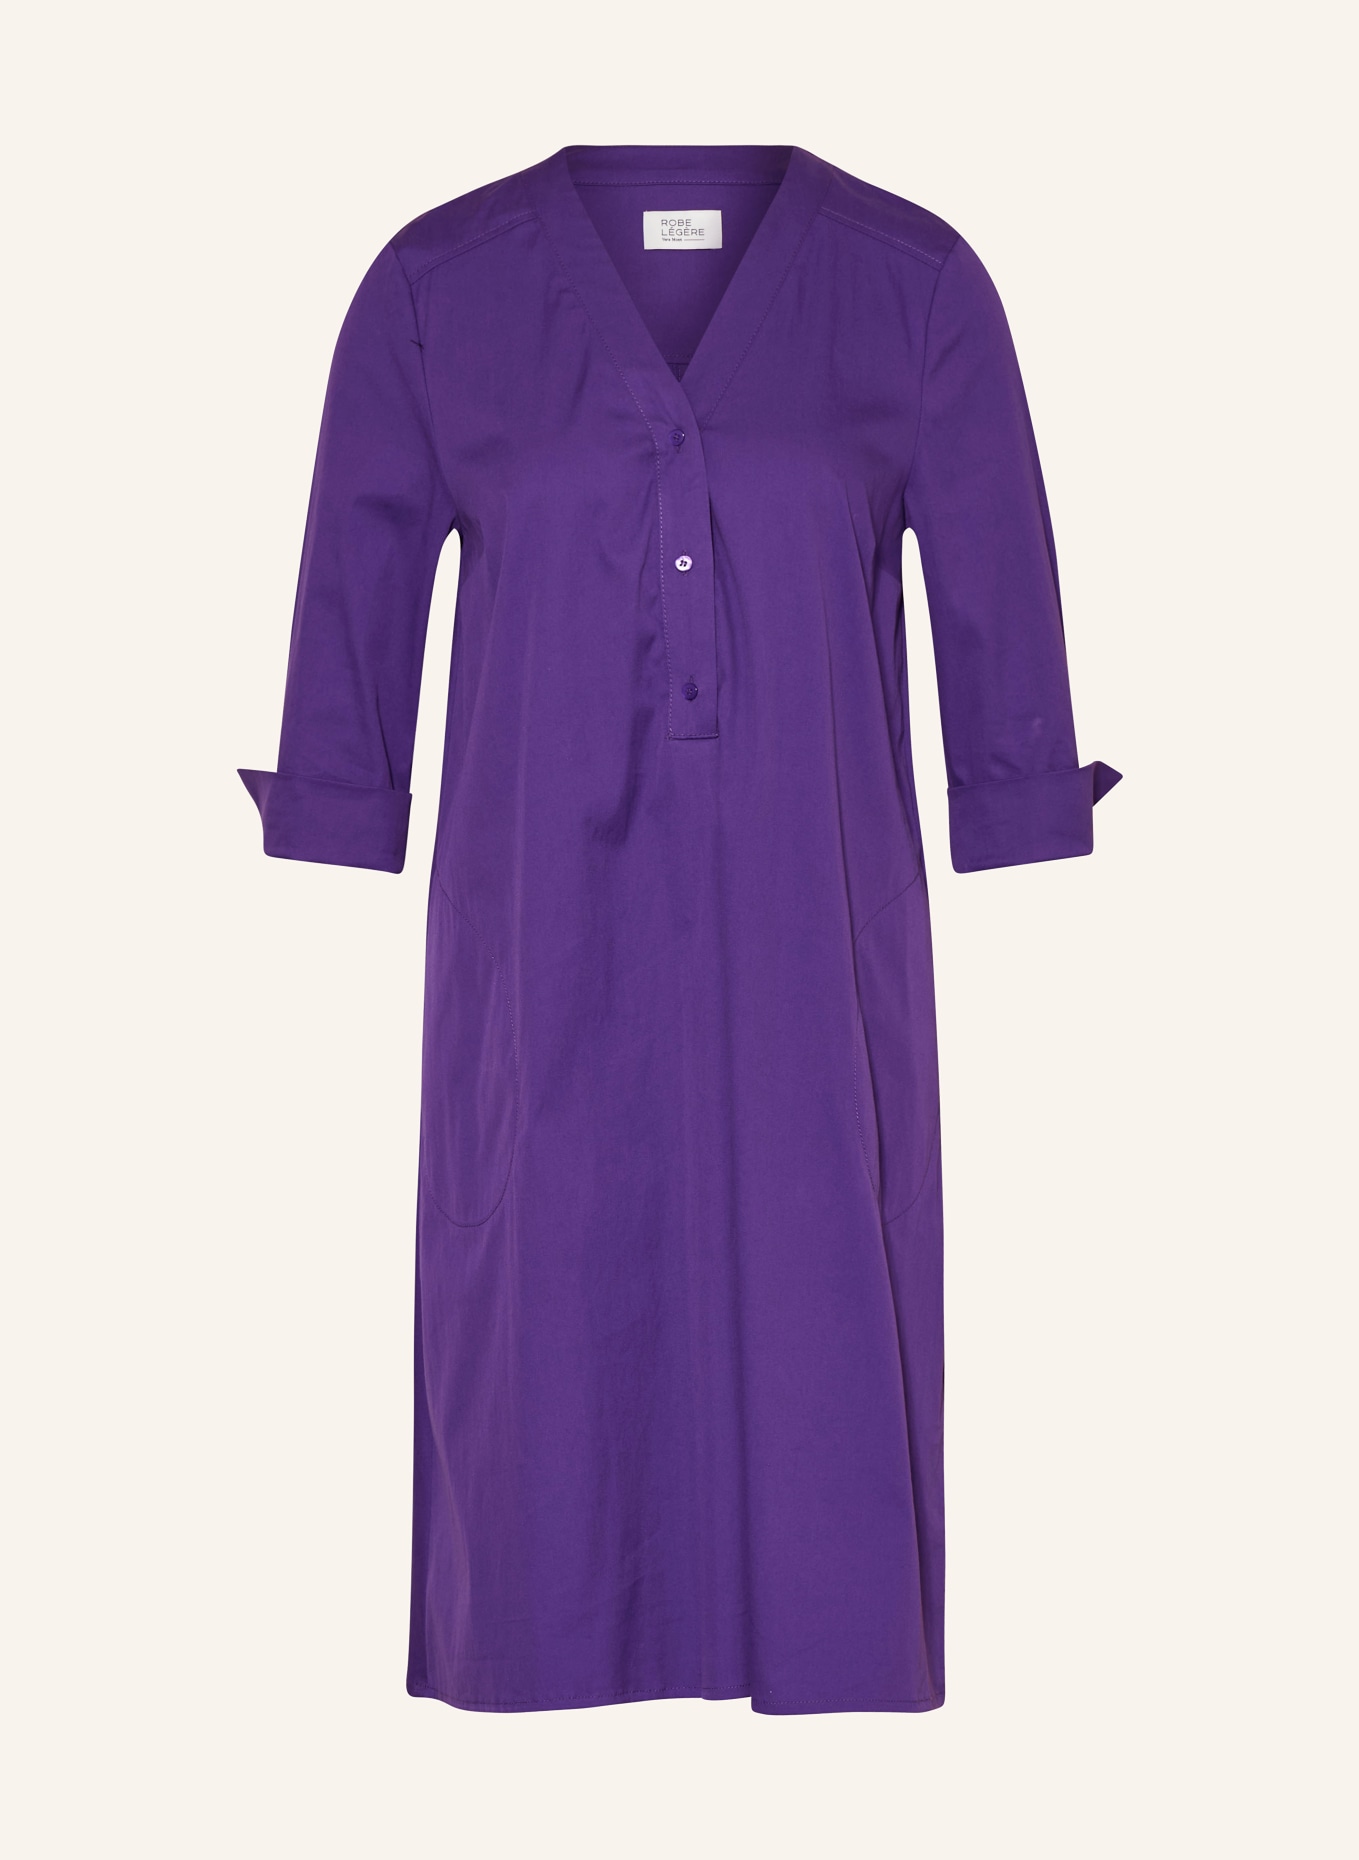 ROBE LÉGÈRE Dress with 3/4 sleeves, Color: PURPLE (Image 1)